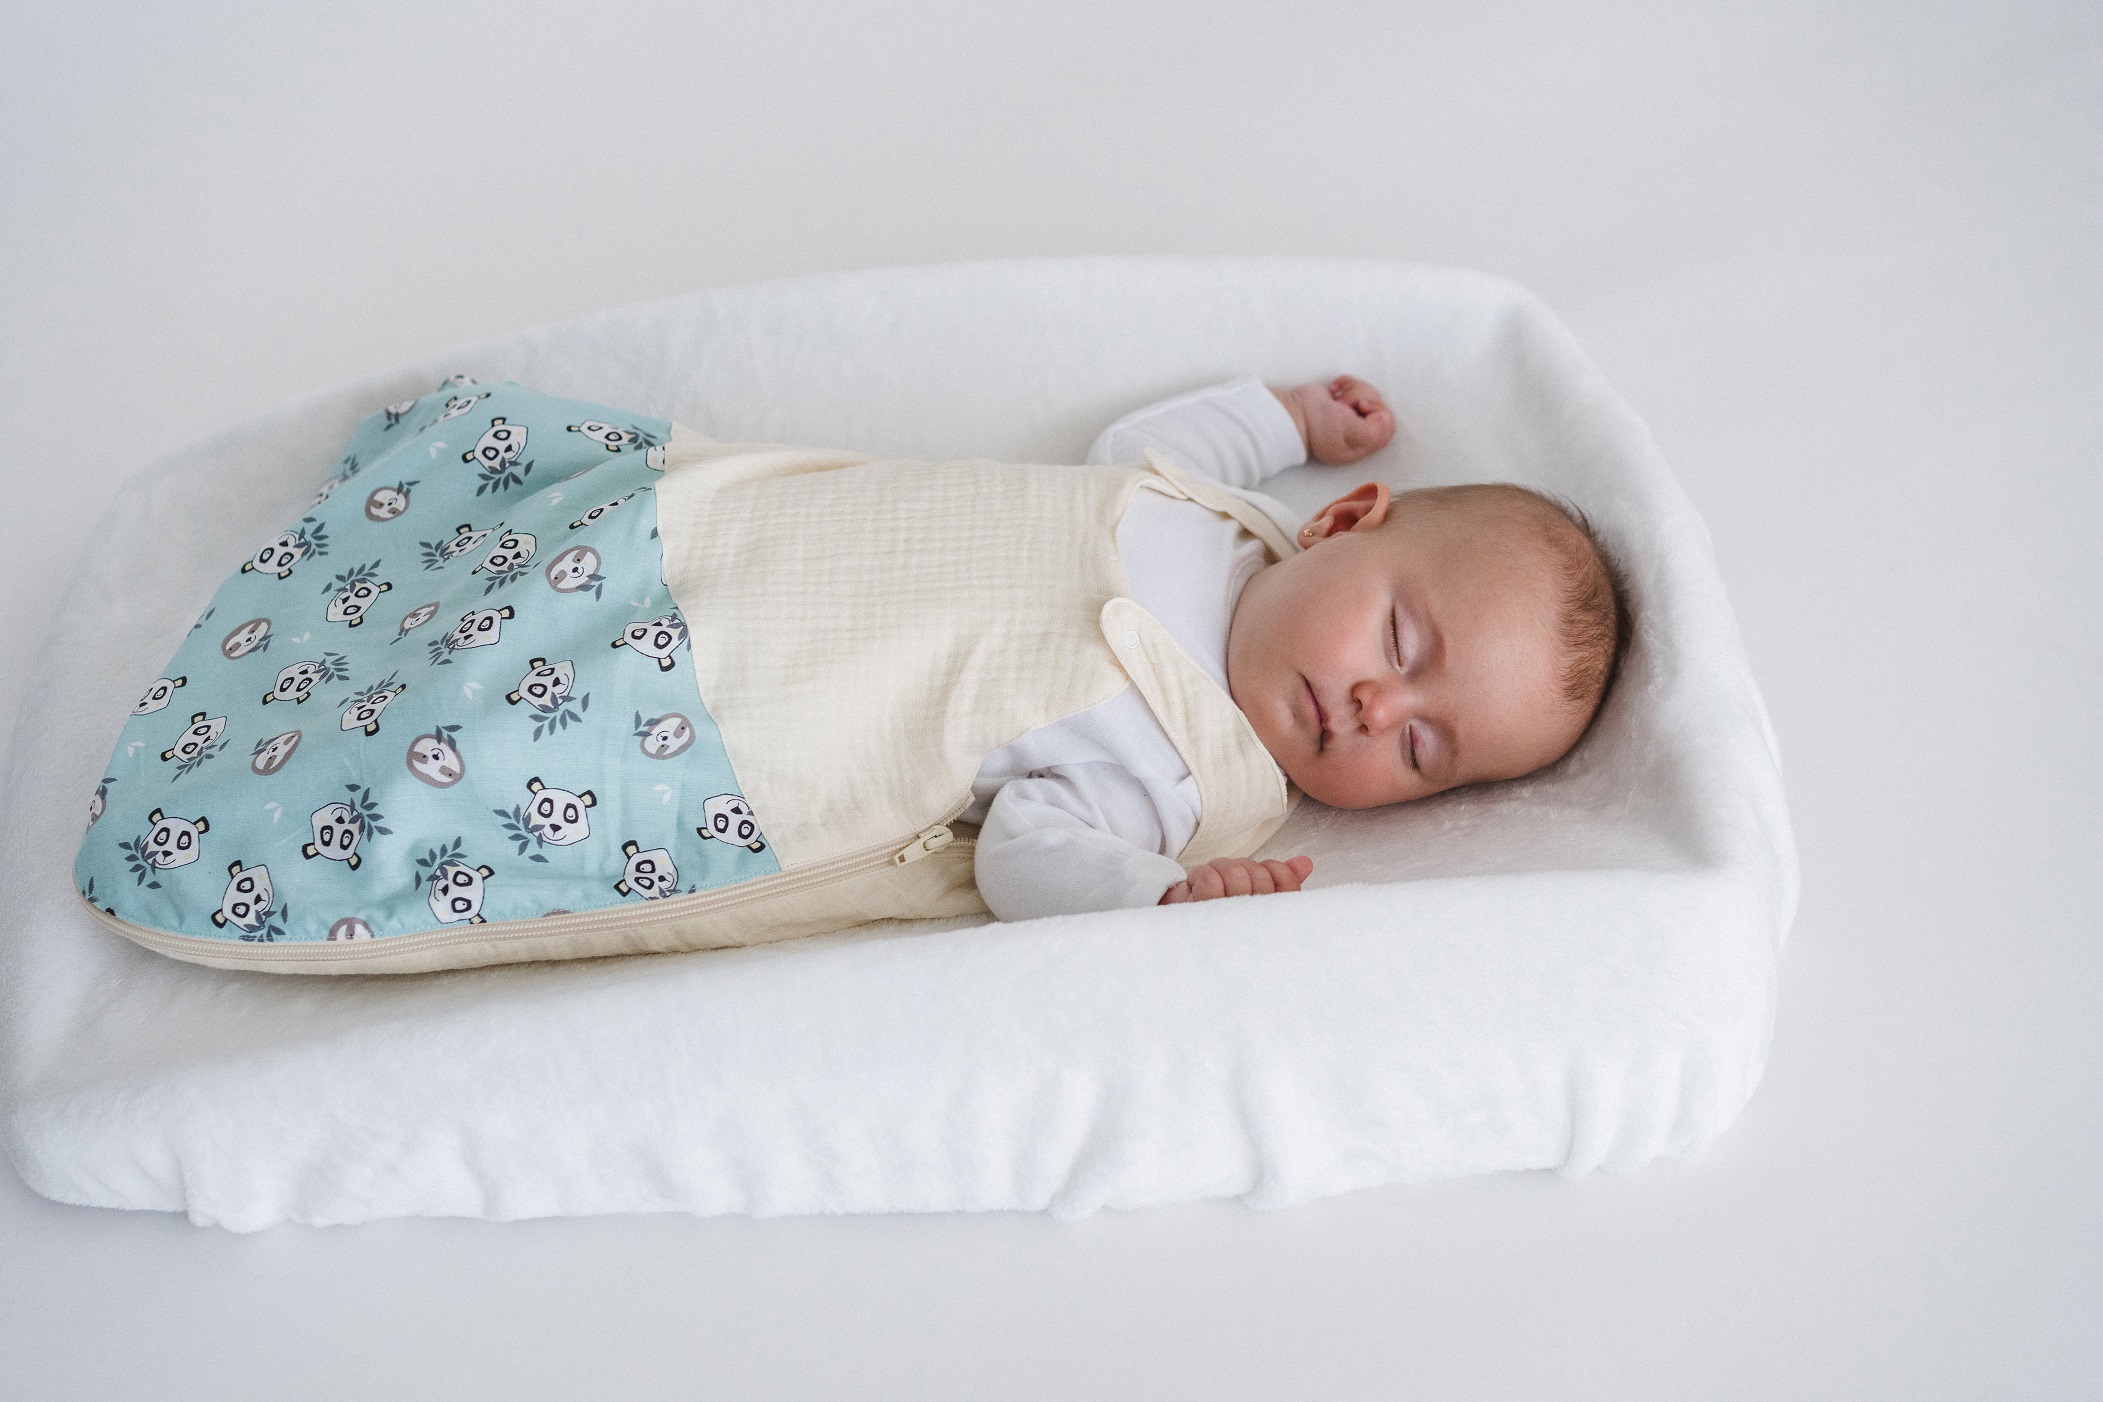 4 recommendations for putting a newborn to sleep